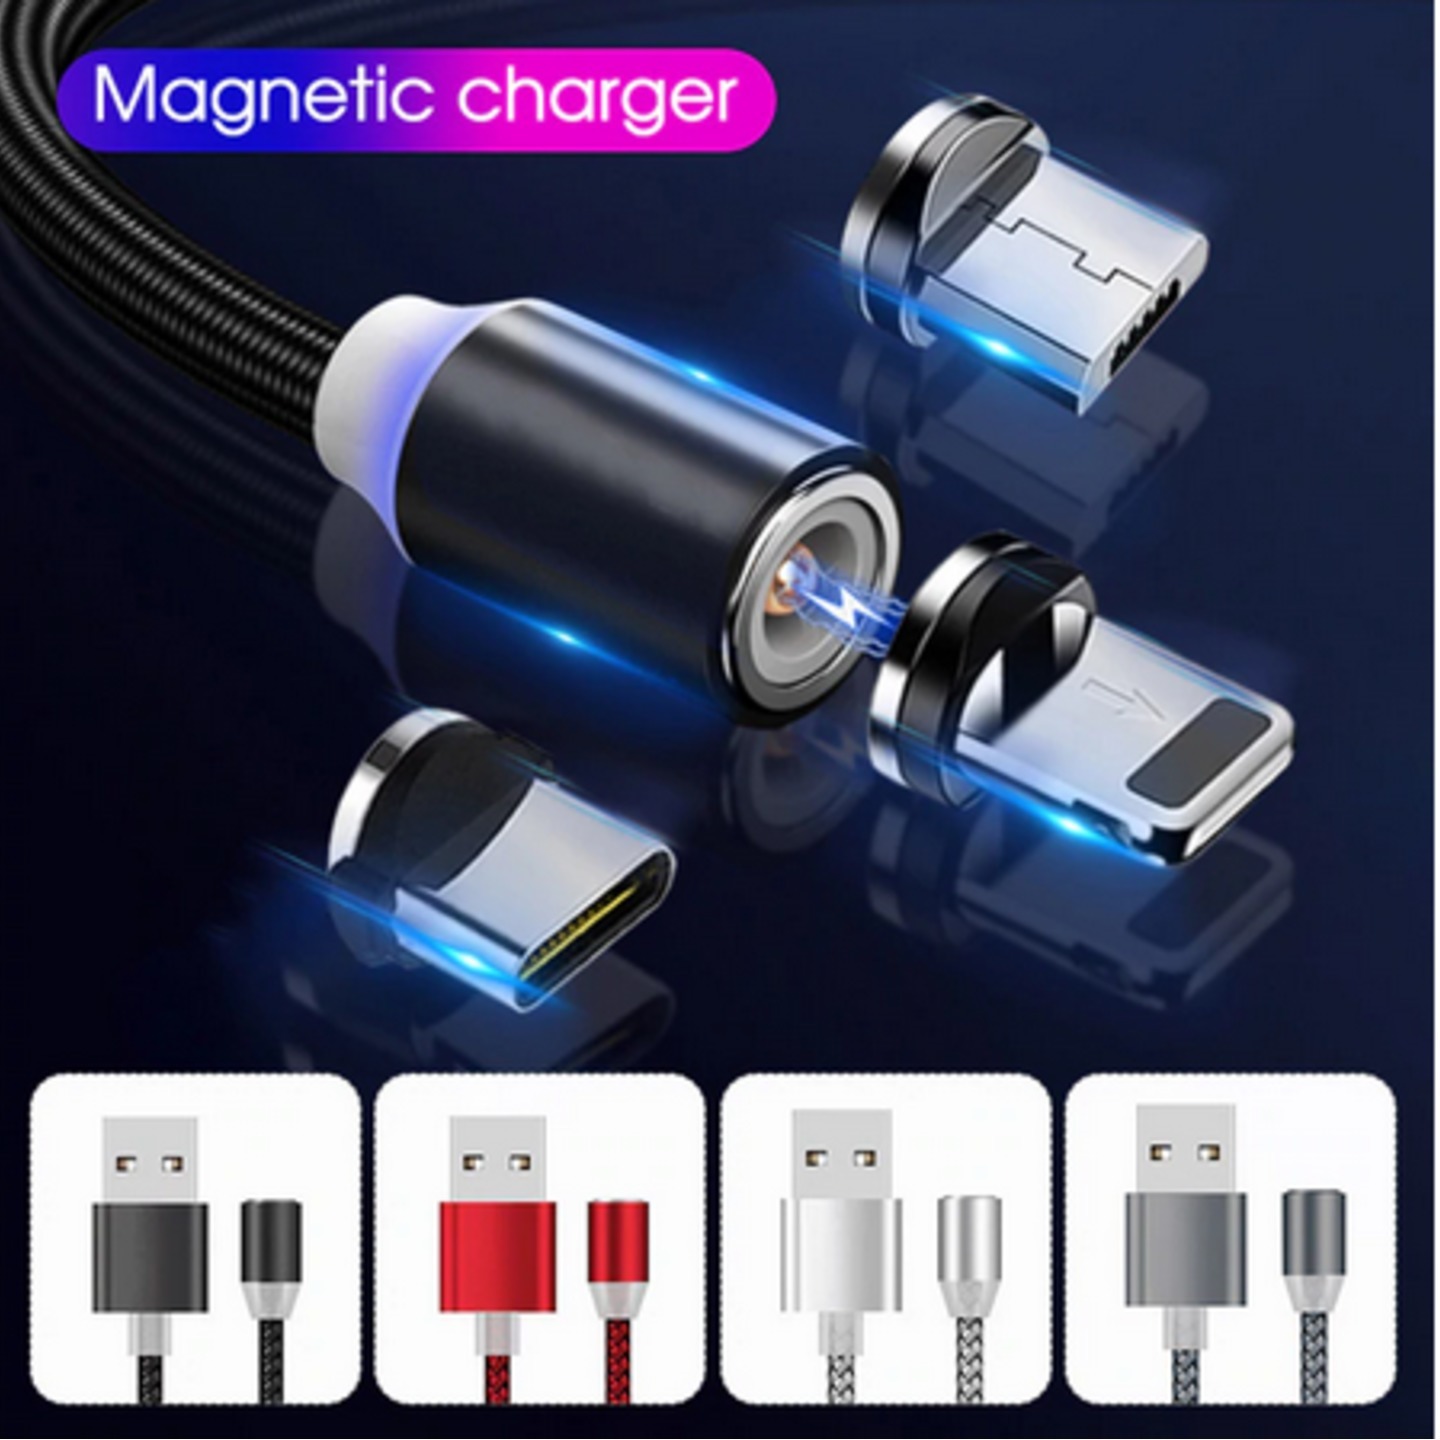 3 in 1 Magnetic Cable For iPhoneAndroid - type C, Micro usb, IOS